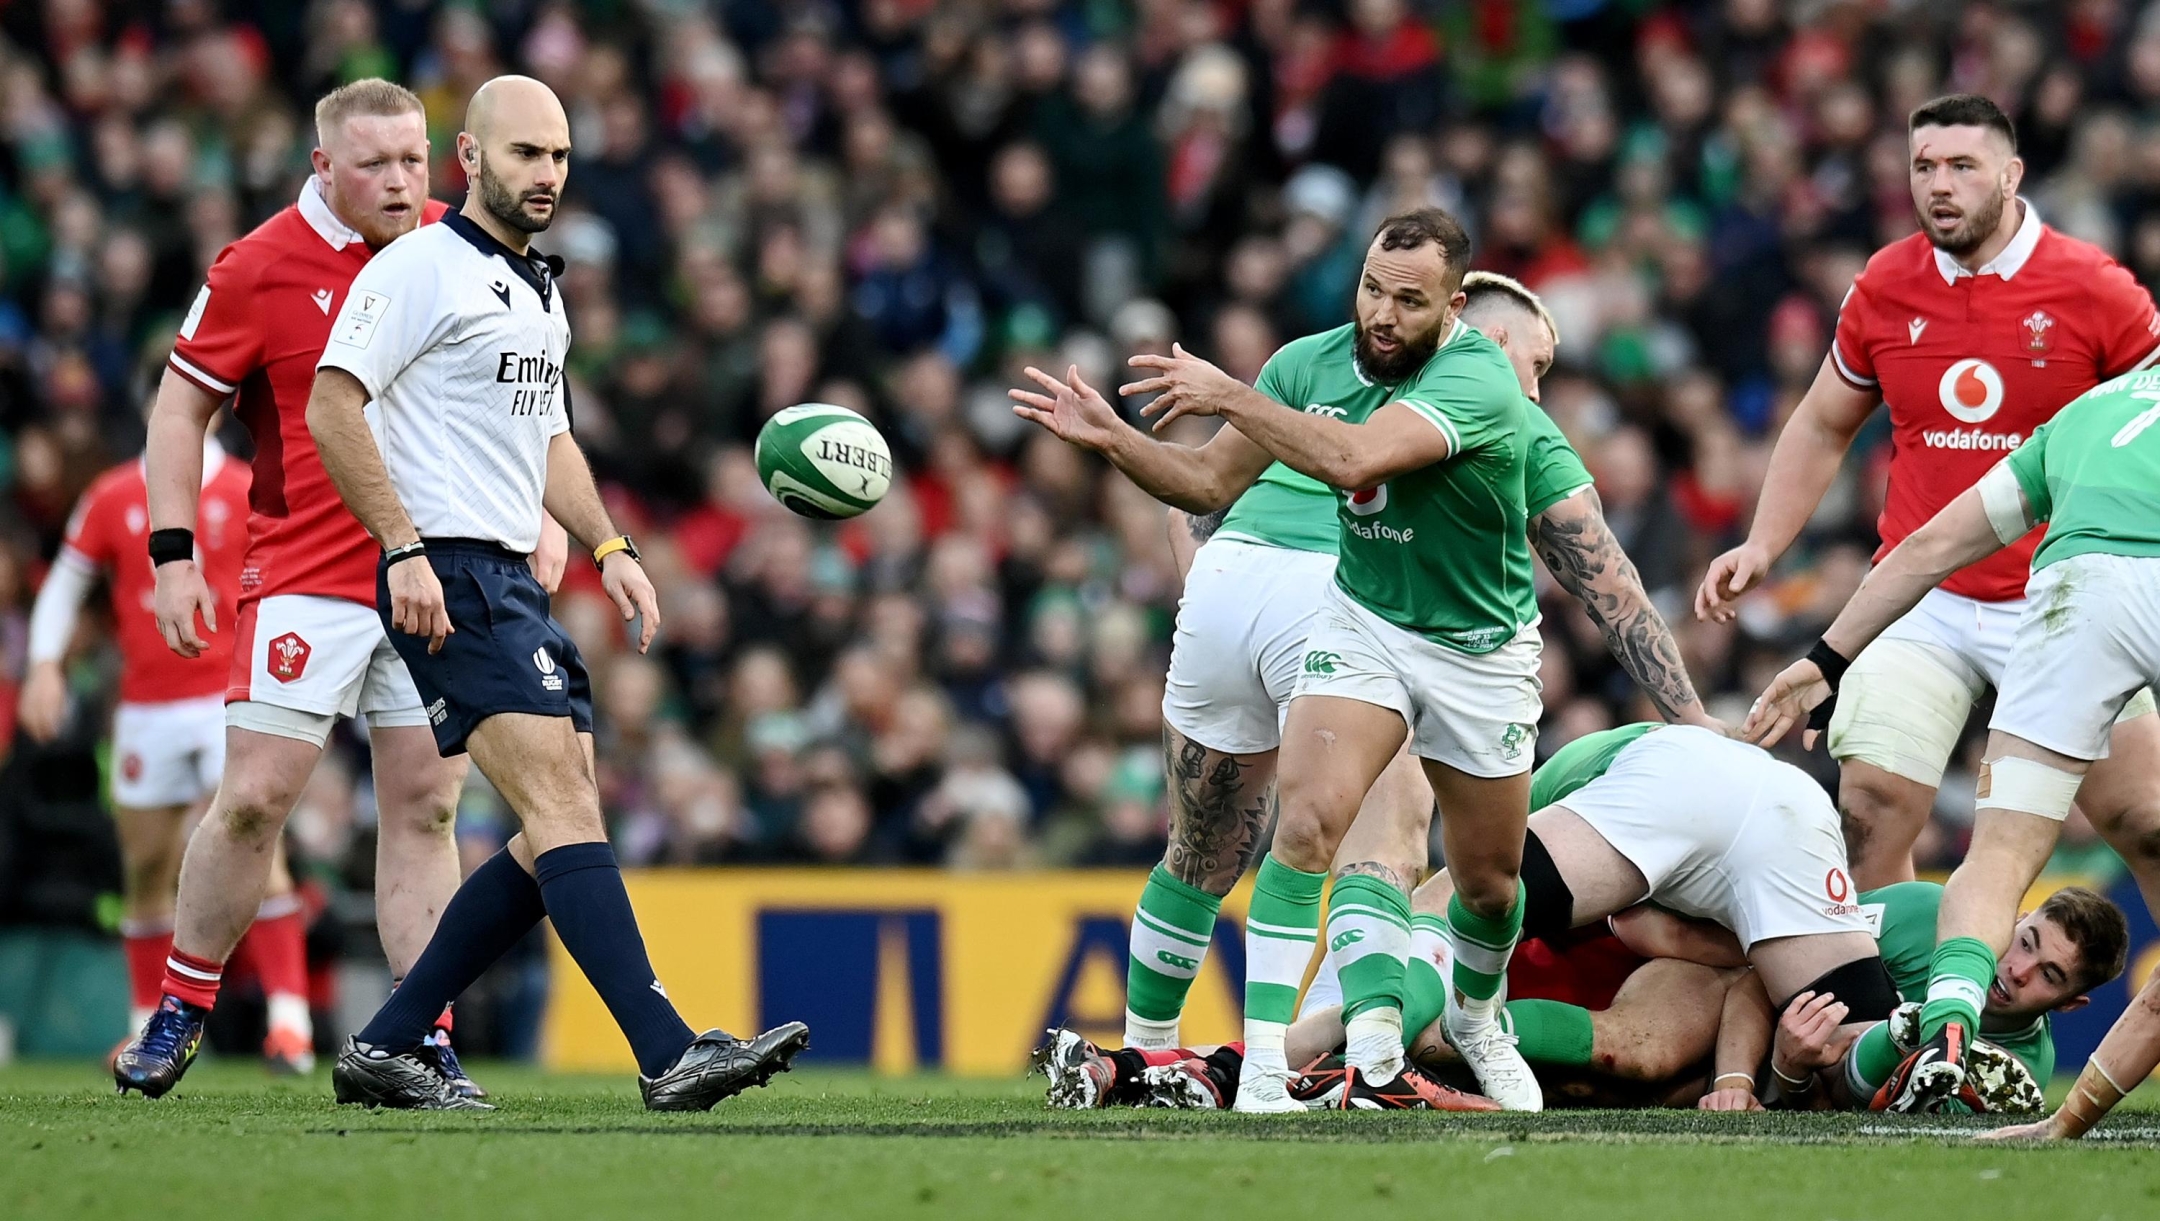 DUBLIN, IRELAND - FEBRUARY 24: Jamison Gibson-Park of Ireland passes the ball out of the ruck during the Guinness Six Nations 2024 match between Ireland and Wales at the Aviva Stadium on February 24, 2024 in Dublin, Ireland. (Photo by Charles McQuillan/Getty Images)